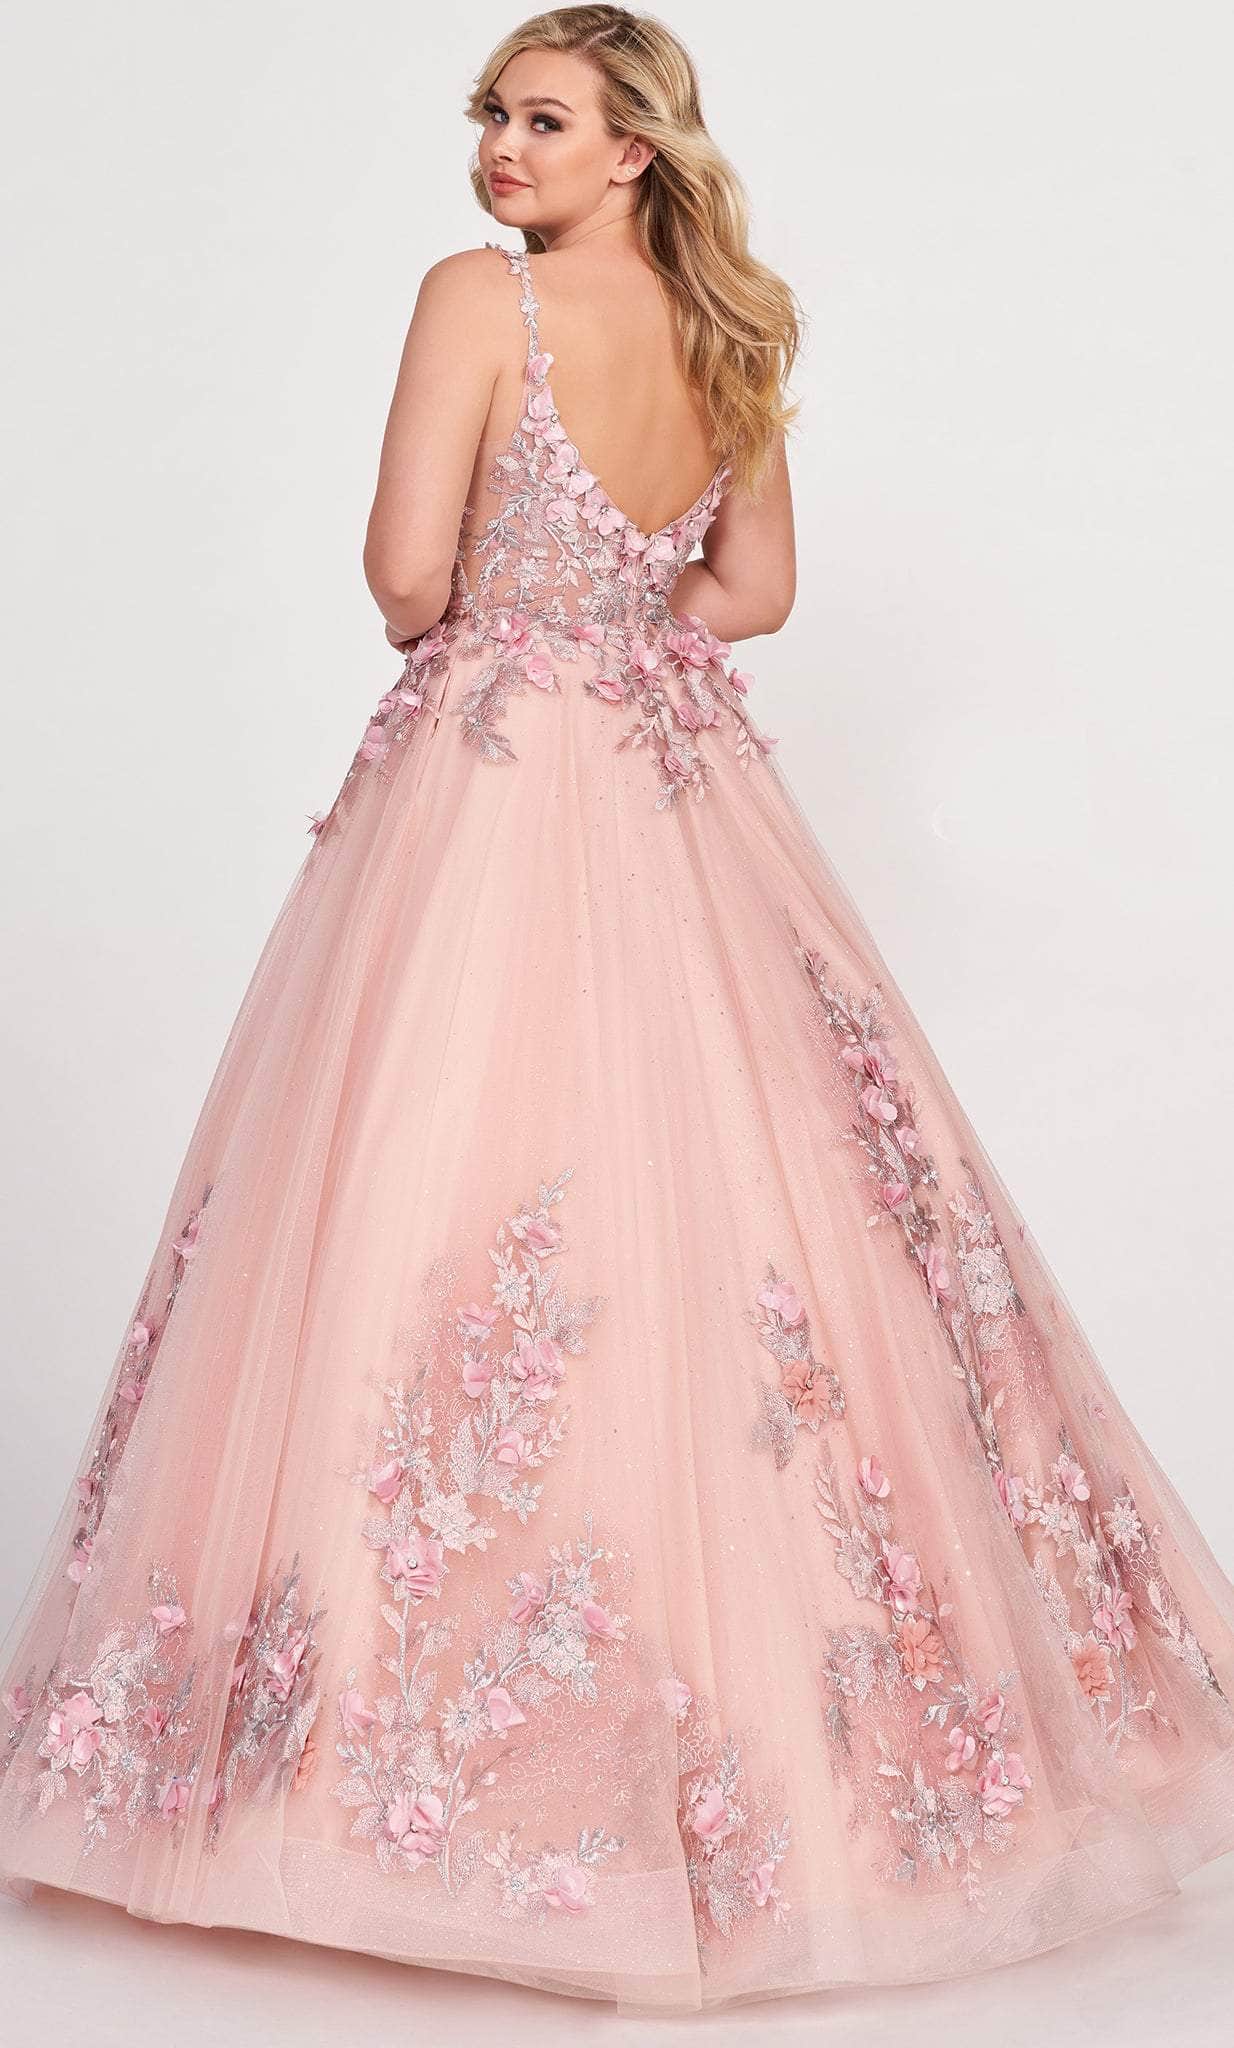 Ellie Wilde EW34125 - Tulle-Made 3D Floral Detailed Gown Ball Gowns